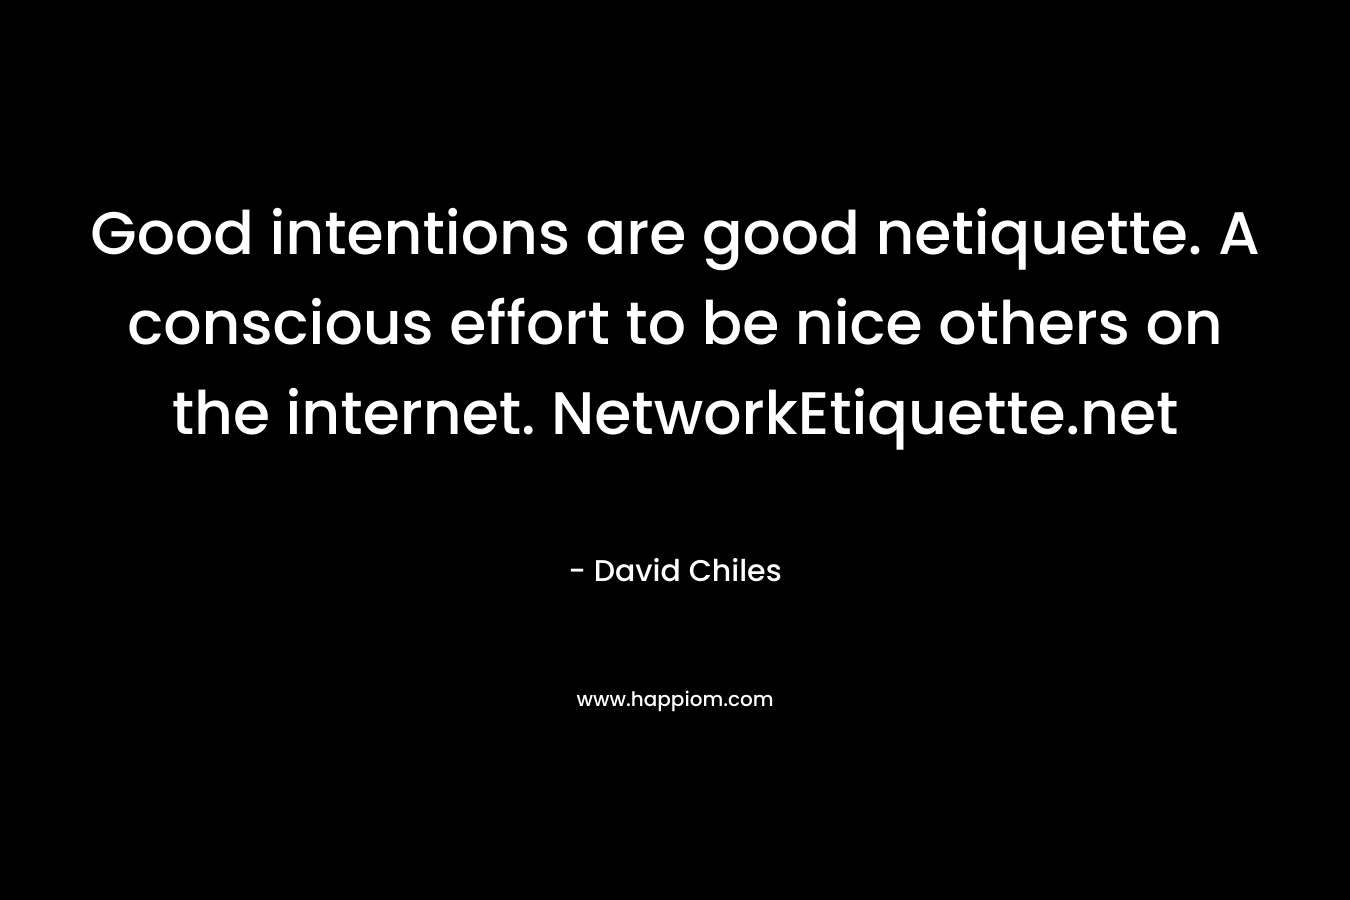 Good intentions are good netiquette. A conscious effort to be nice others on the internet. NetworkEtiquette.net – David Chiles